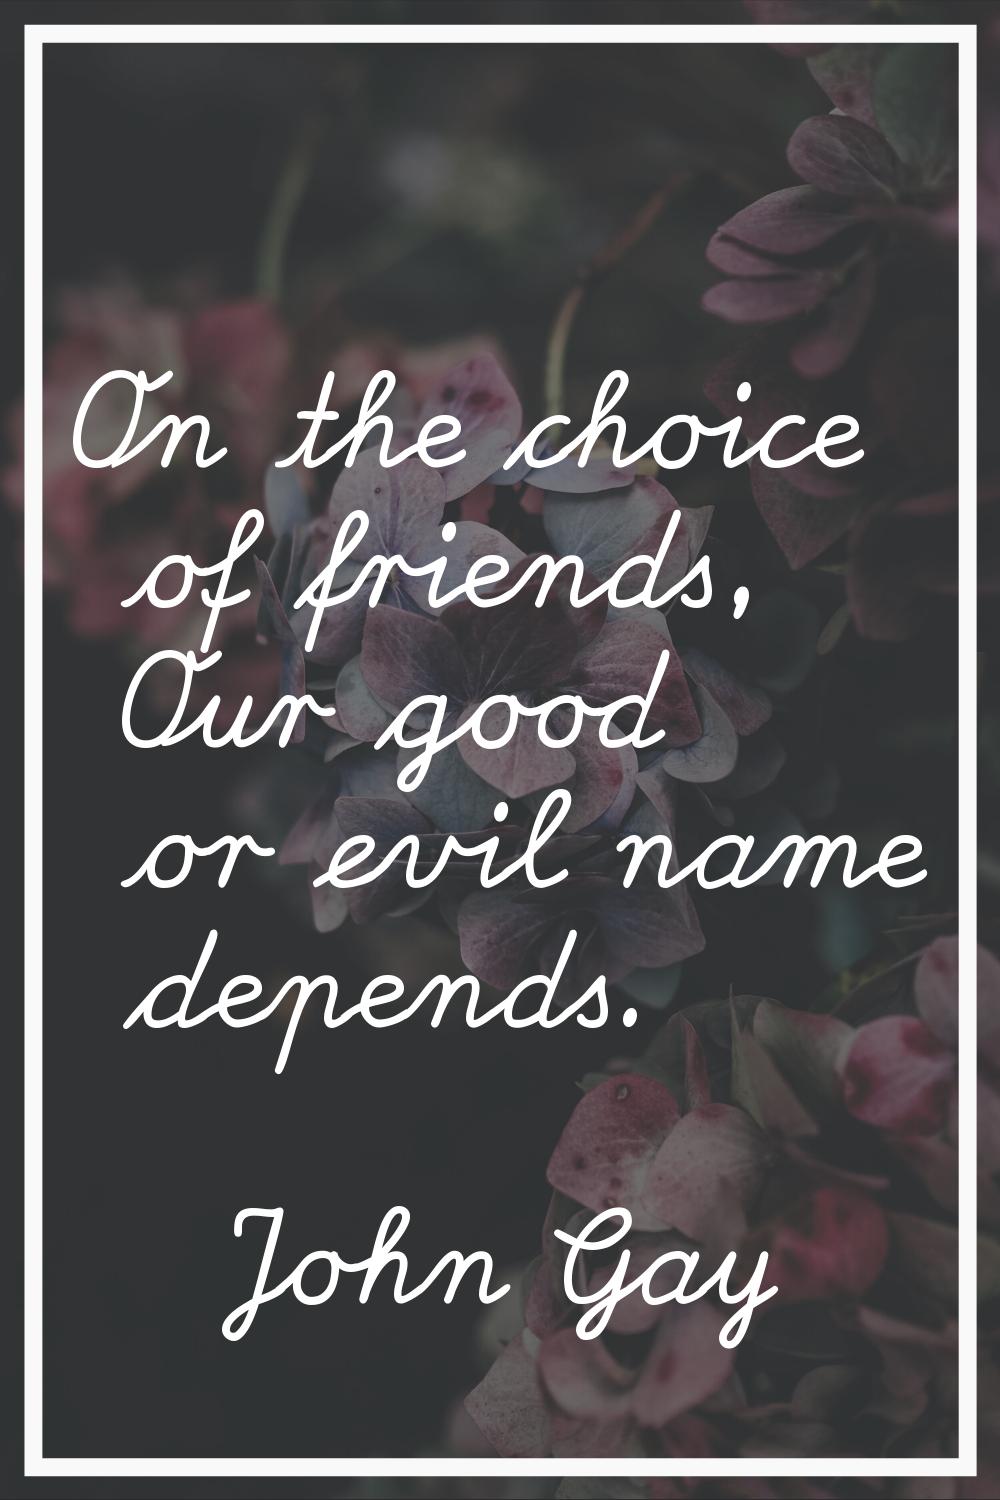 On the choice of friends, Our good or evil name depends.